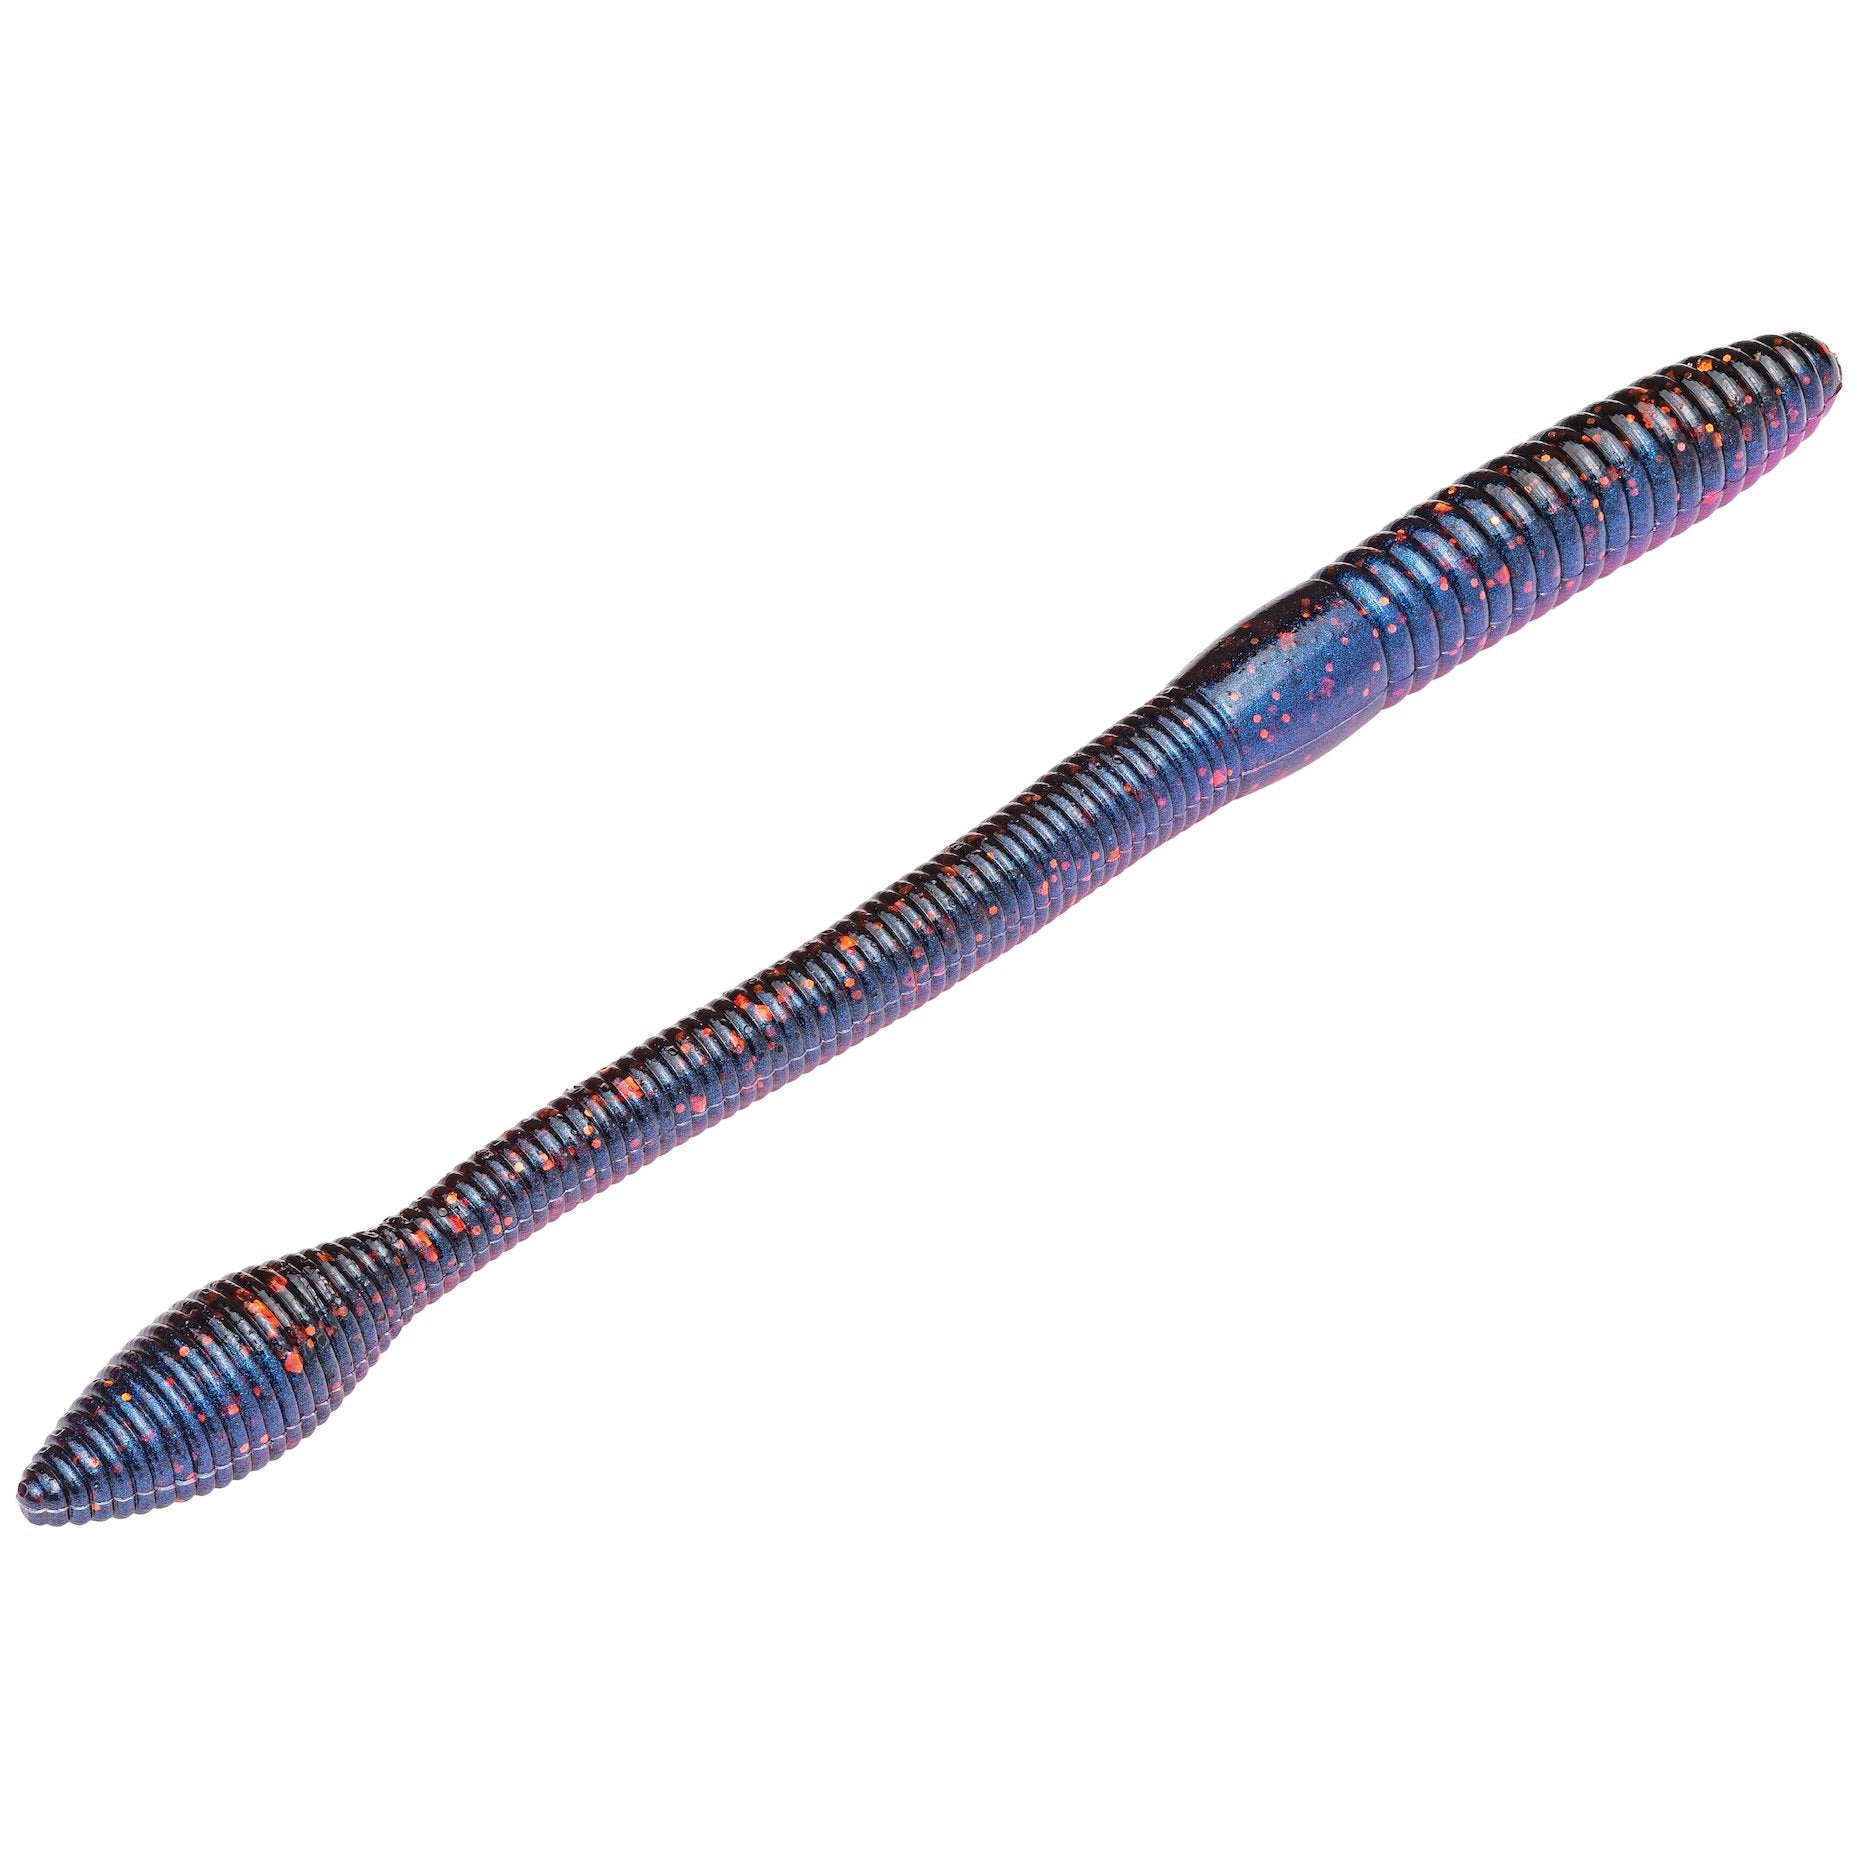 Strike King KVD Fat Baby Finesse Worm - Hamilton Bait and Tackle